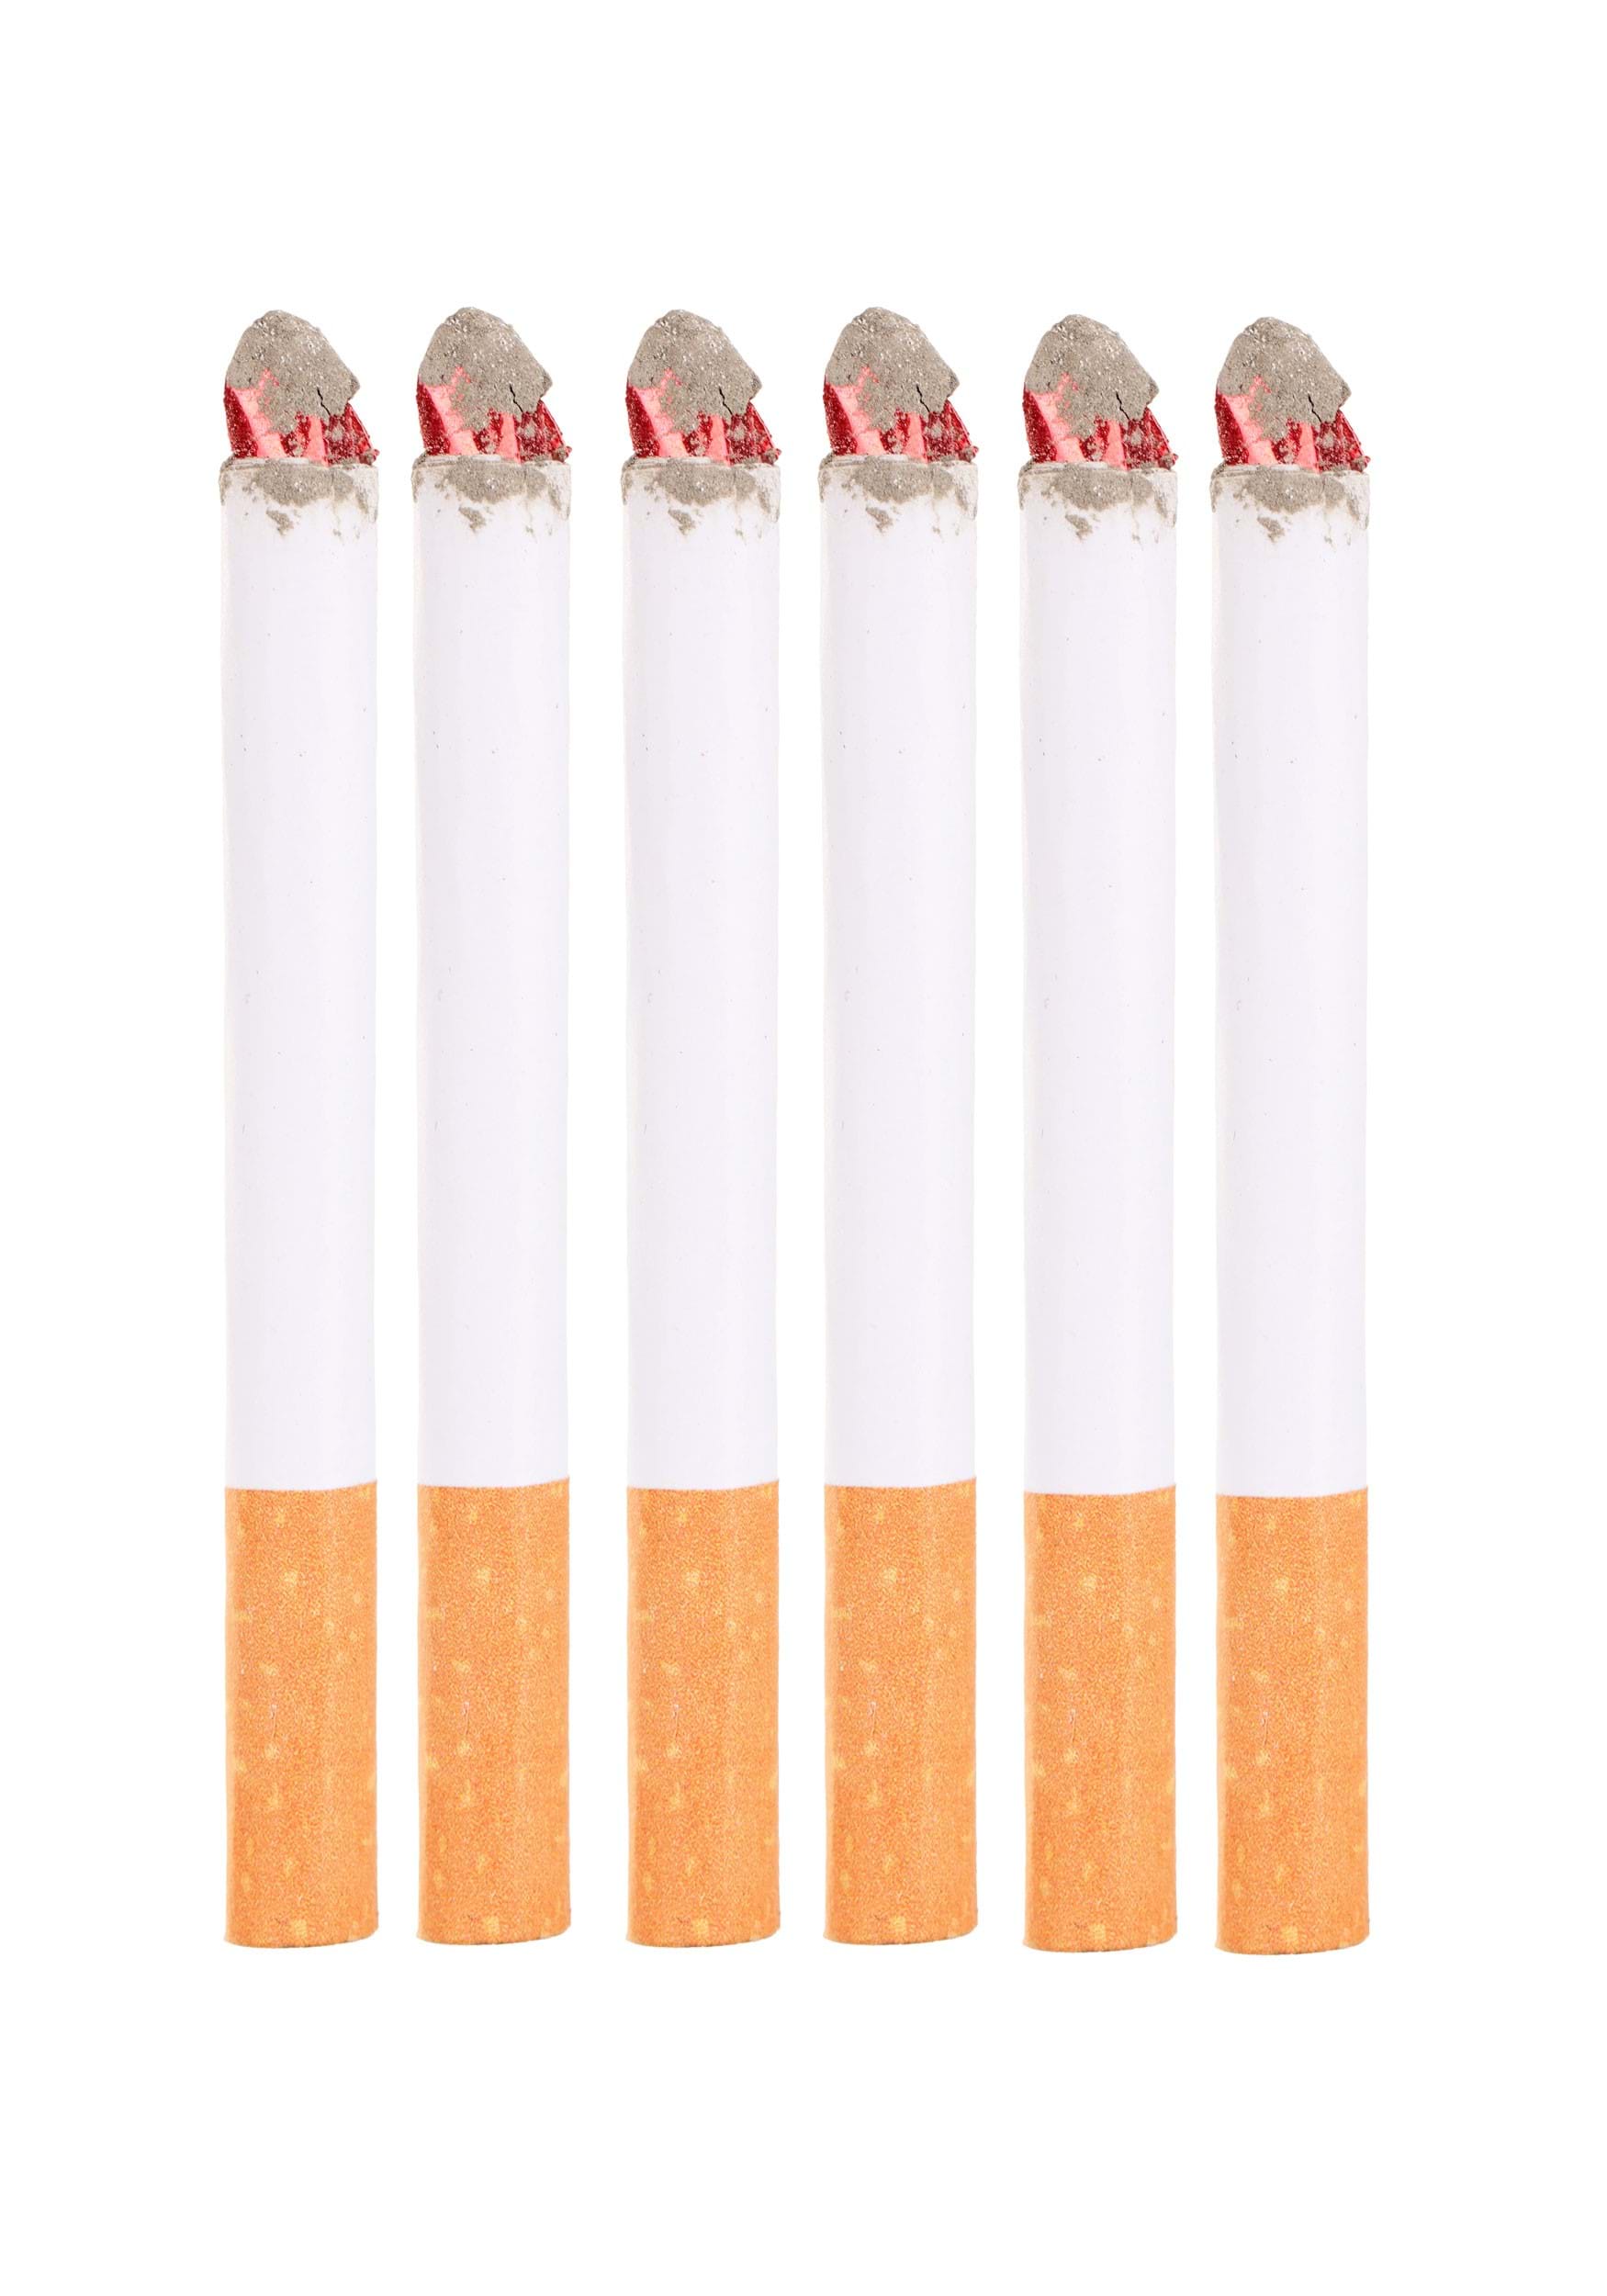 Compare prices for Nicless Cigarette Filters across all European